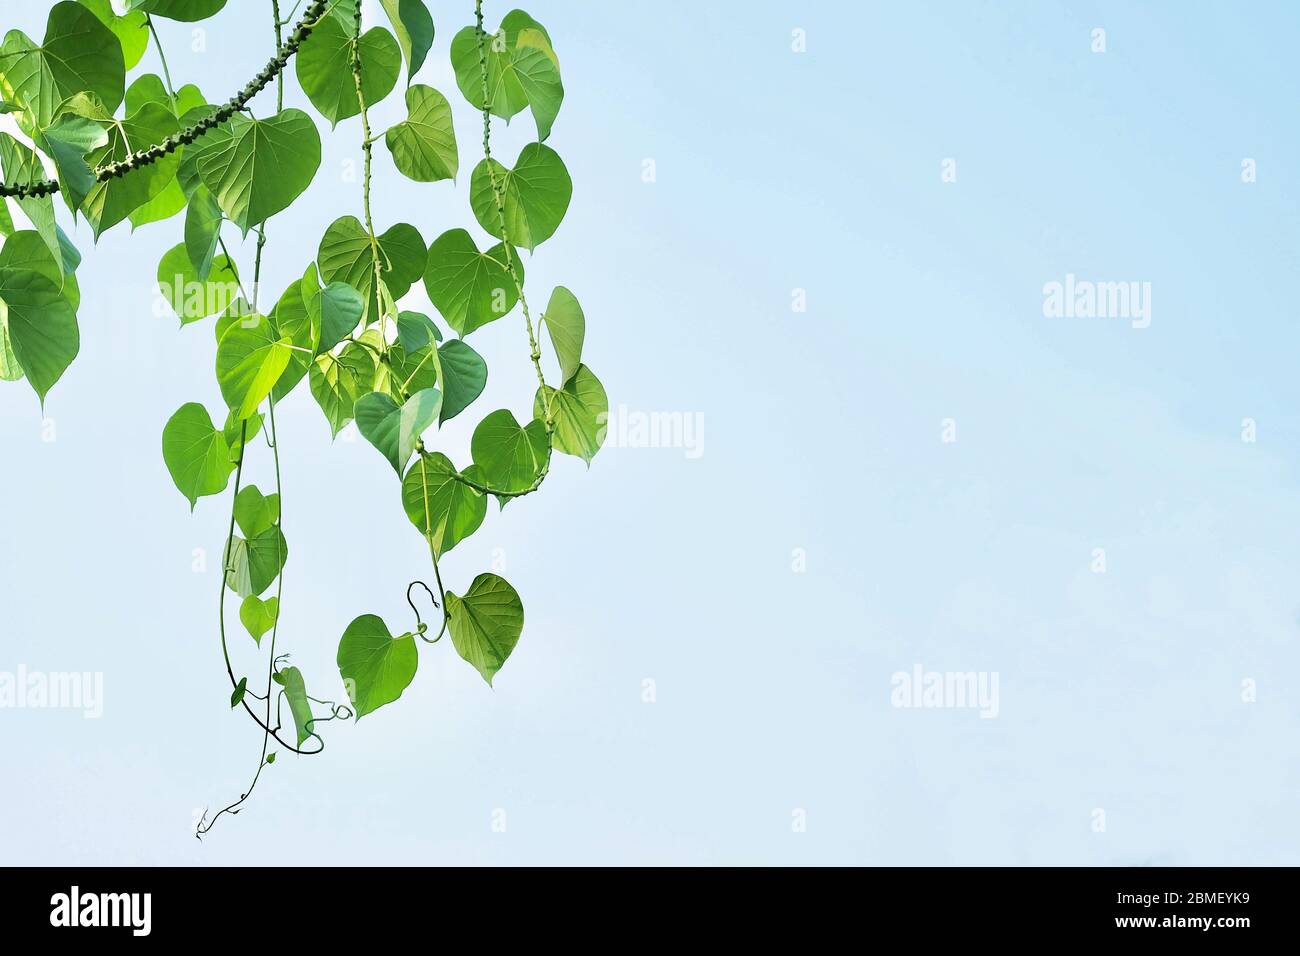 Vegetable and Herb, Tinospora Cordifolia, Guduchi, Giloy or Heart Leaved Moonseed Plant Against on Blue Sky. Use in Traditional Medicine to Treat Vari Stock Photo